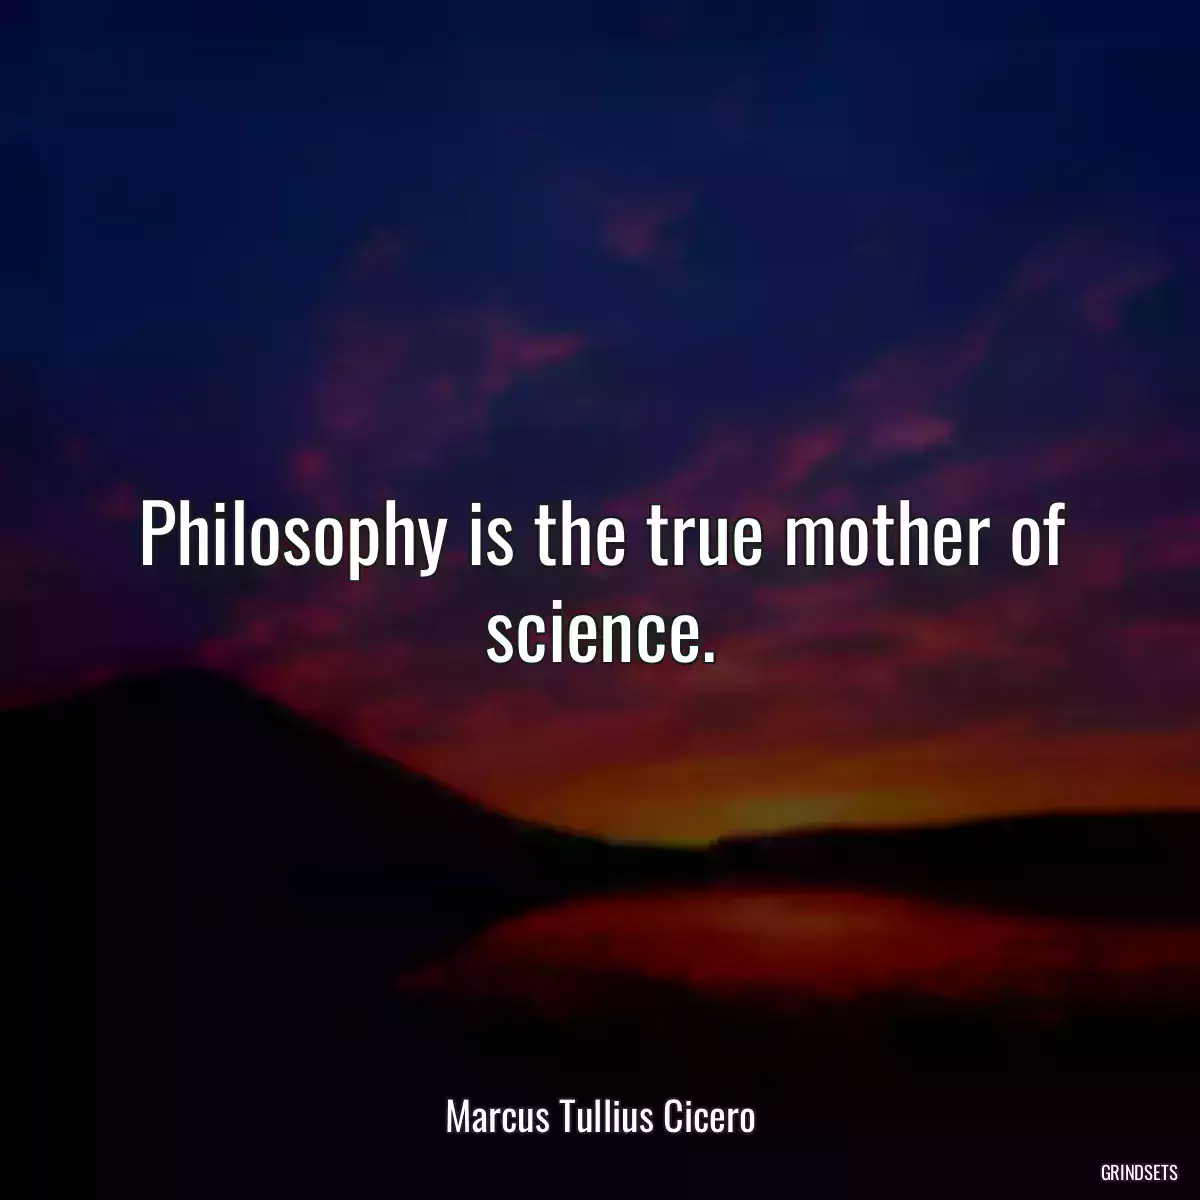 Philosophy is the true mother of science.